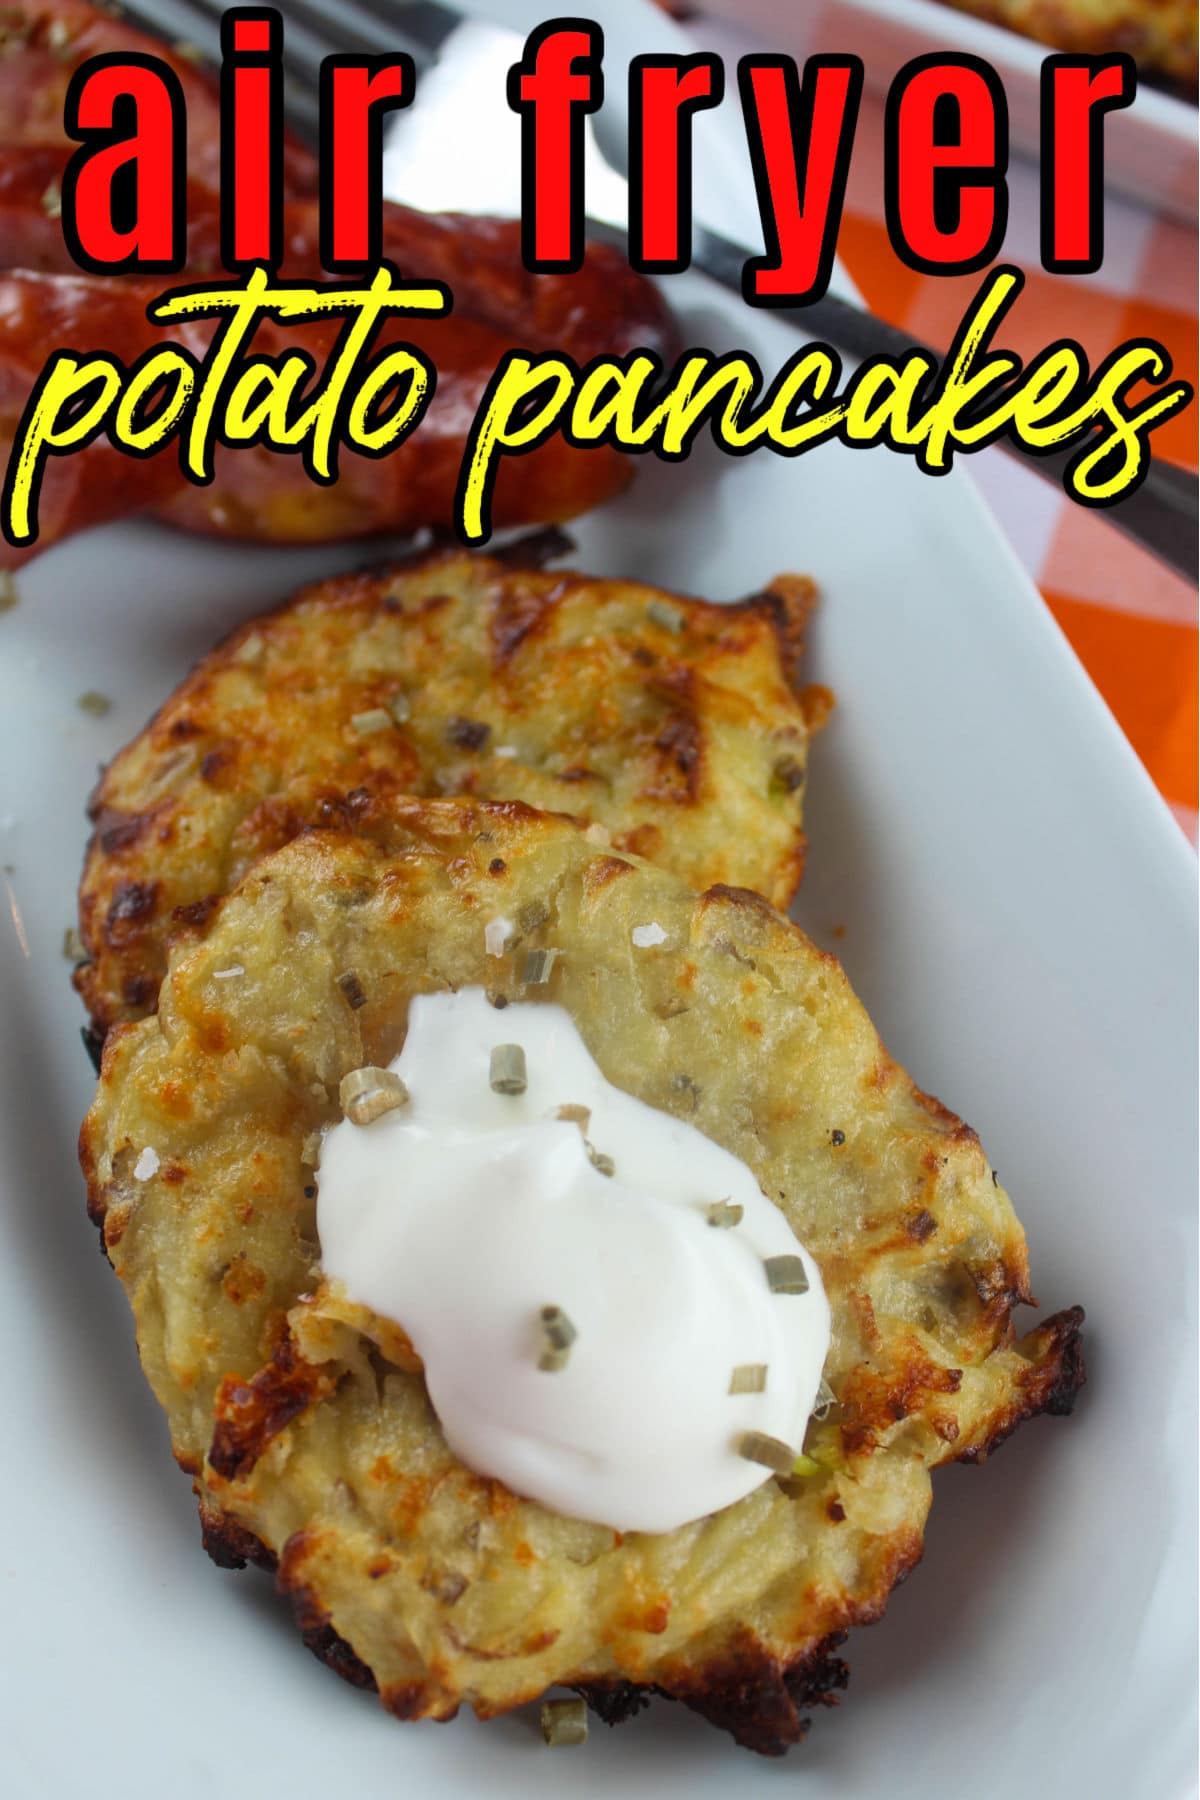 Air Fryer Potato Pancakes are my favorite side dish! They're quick and easy and use up leftovers! It's a way to totally transform leftover mashed potatoes into something tasty and unique!  via @foodhussy